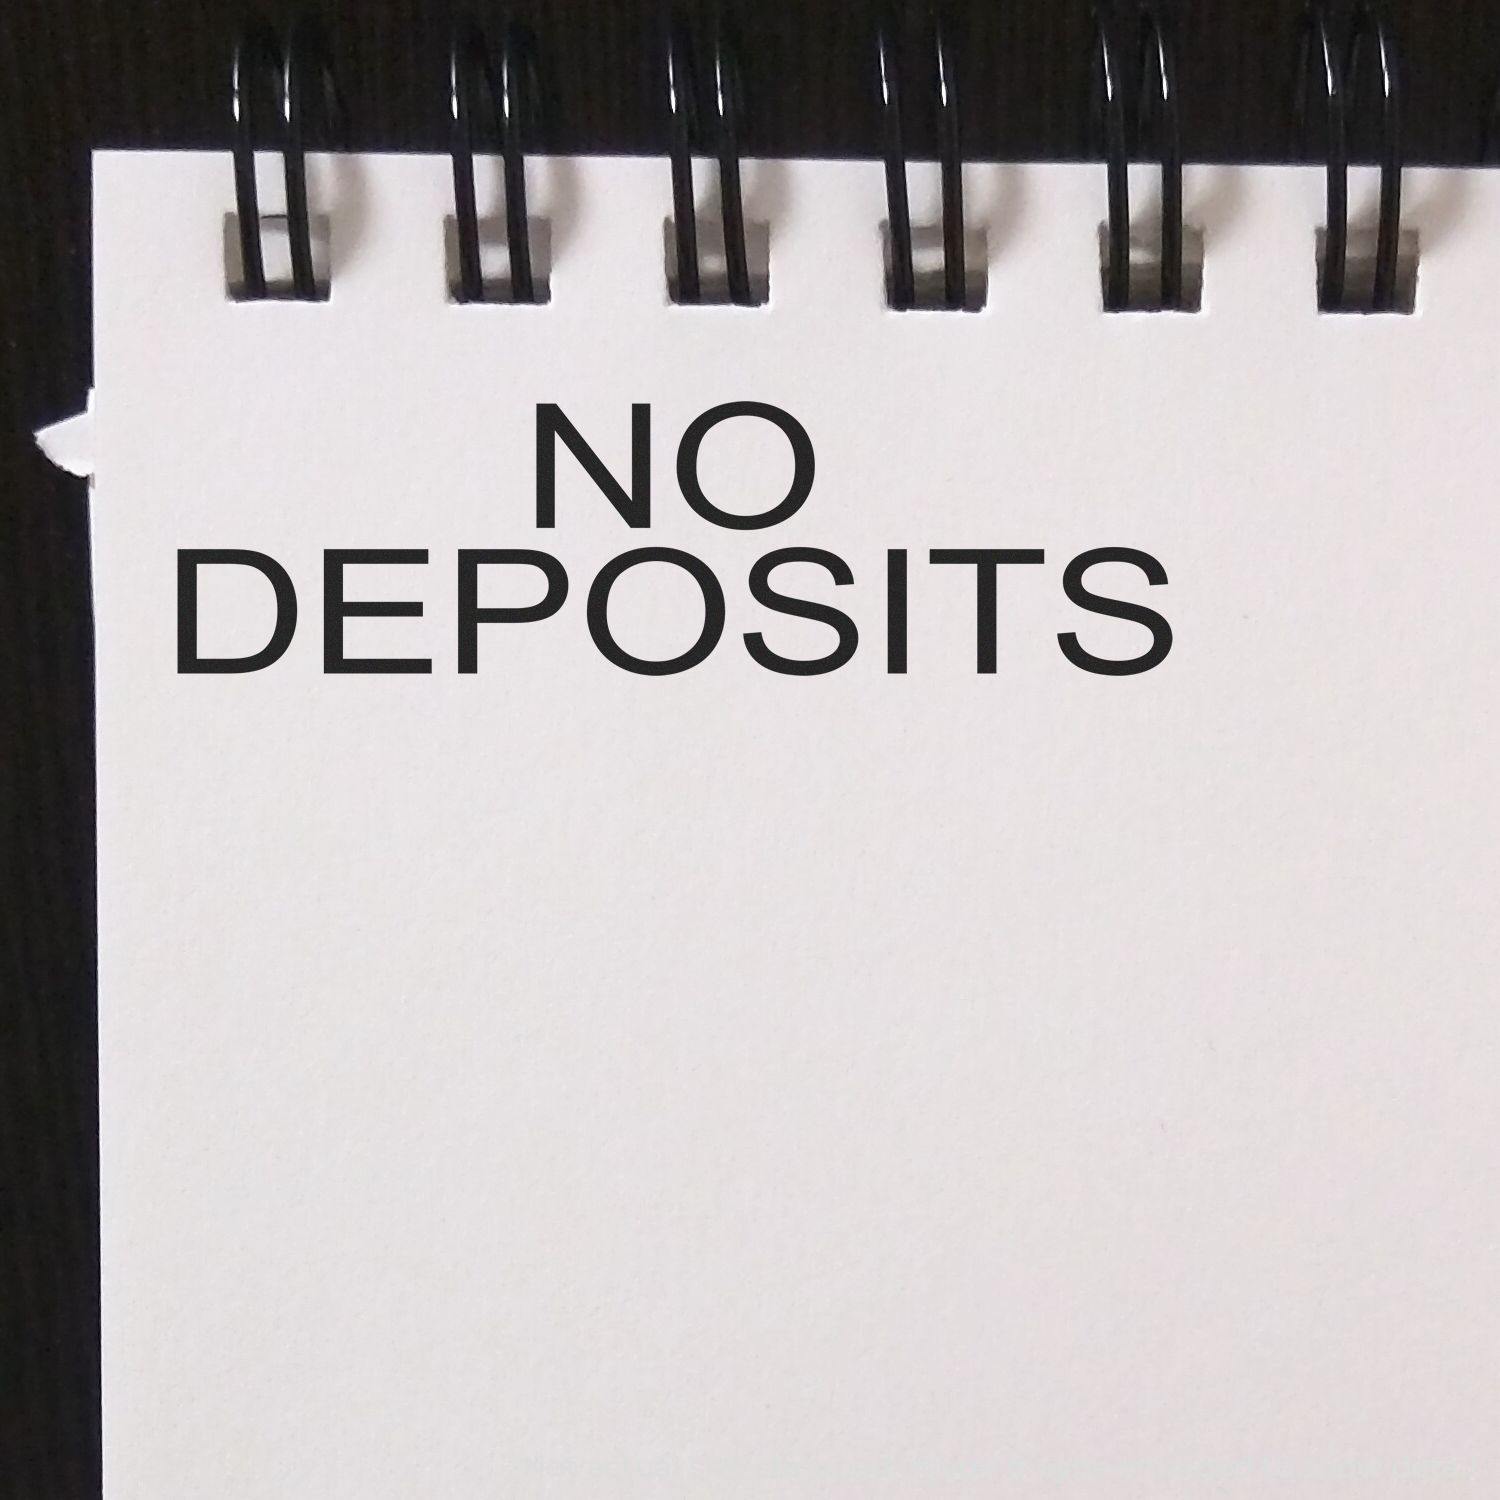 A stock office rubber stamp with a stamped image showing how the text "NO DEPOSITS" is displayed after stamping.